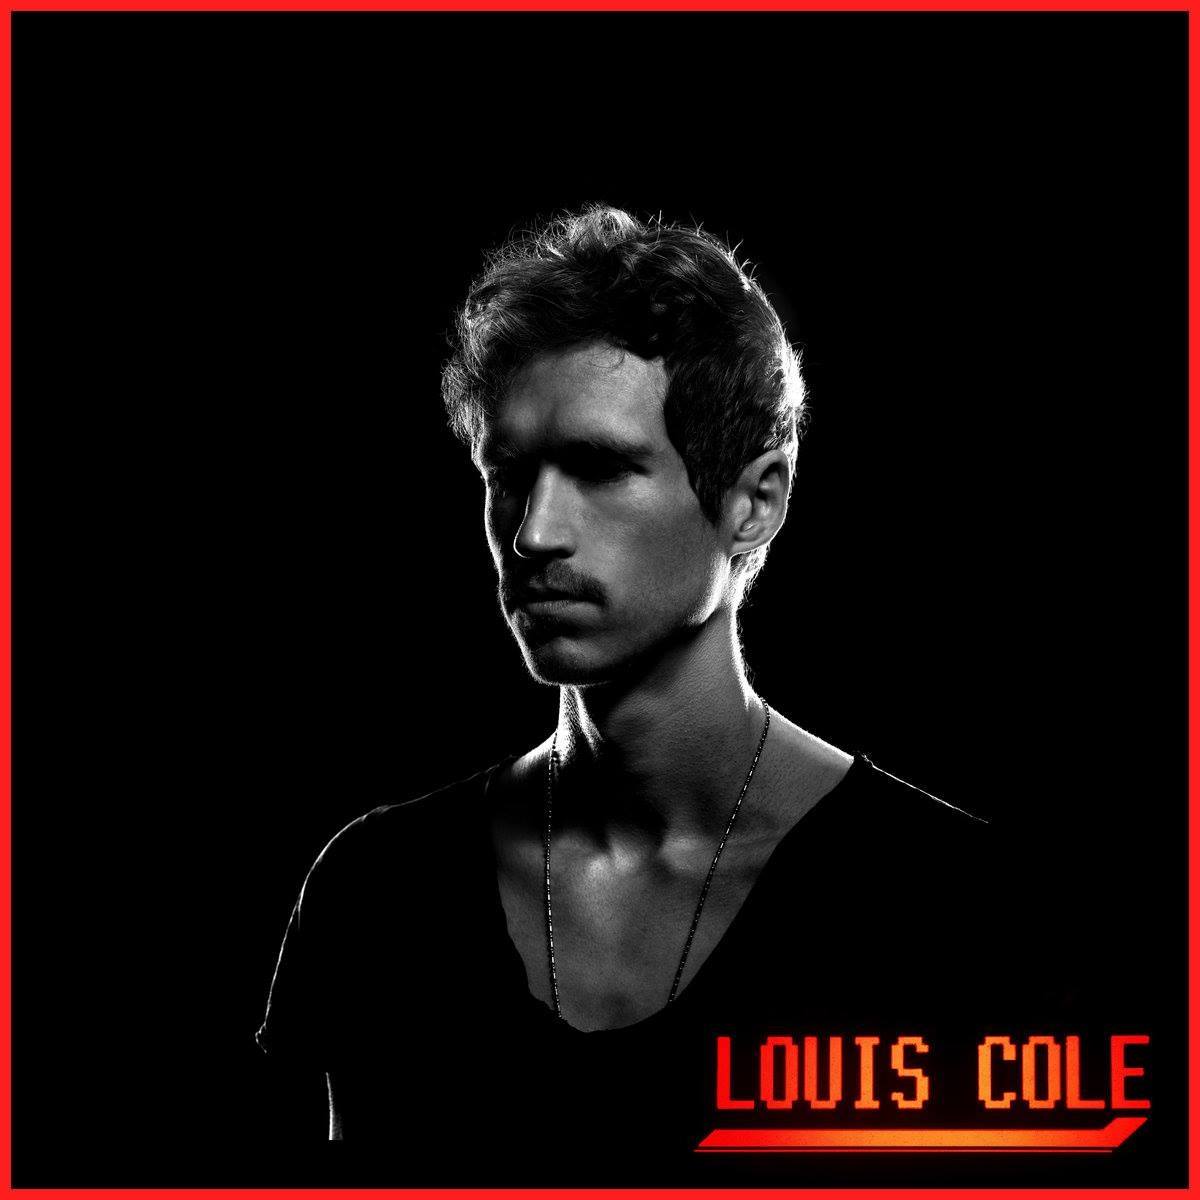 The delightful deviance of Louis Cole